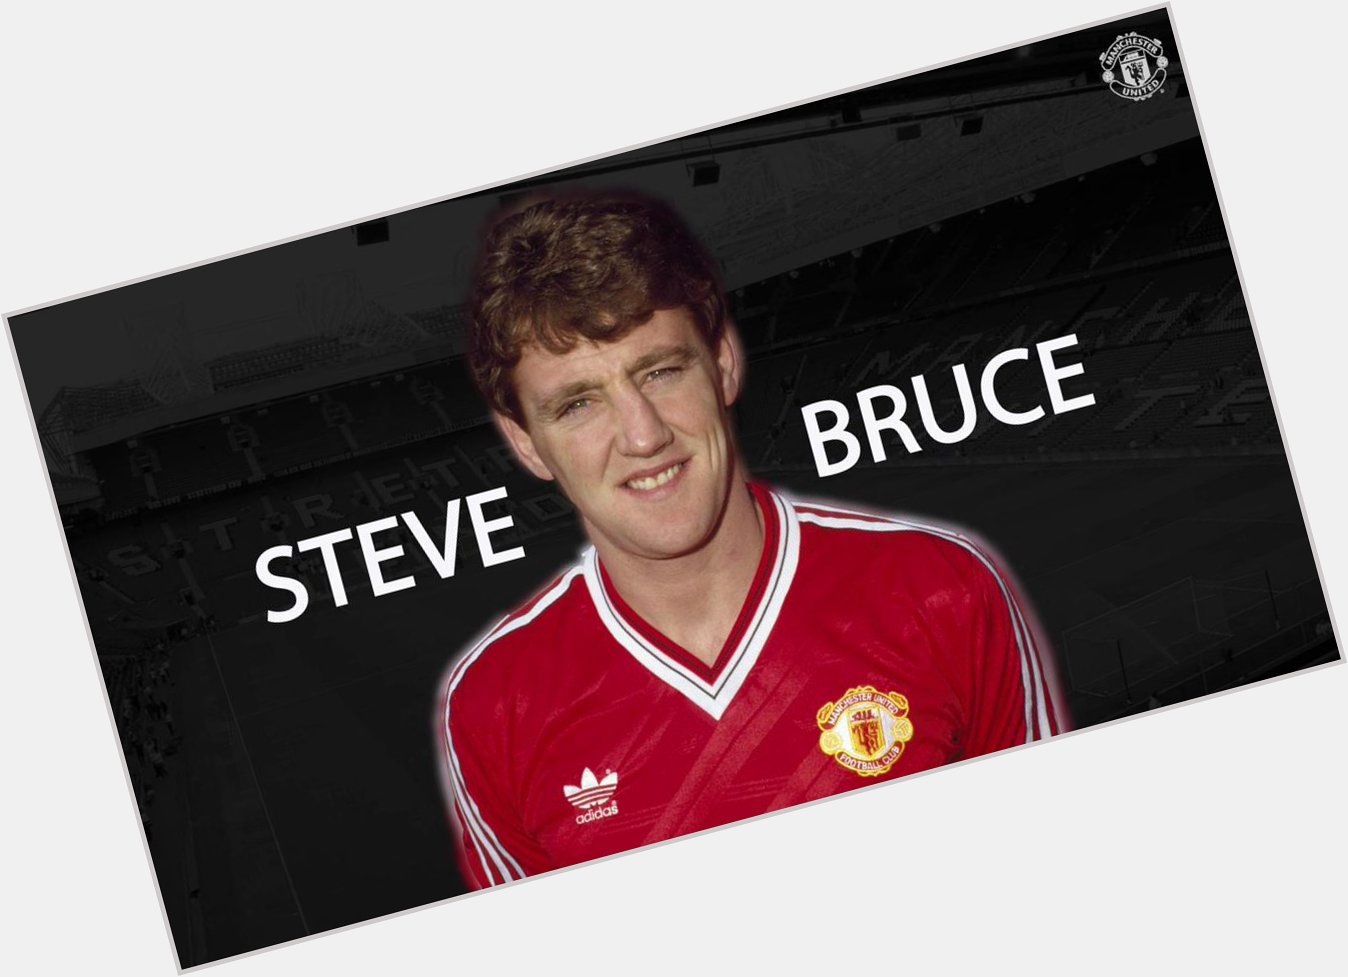 We\re also wishing former defender Steve Bruce a big happy birthday today! 